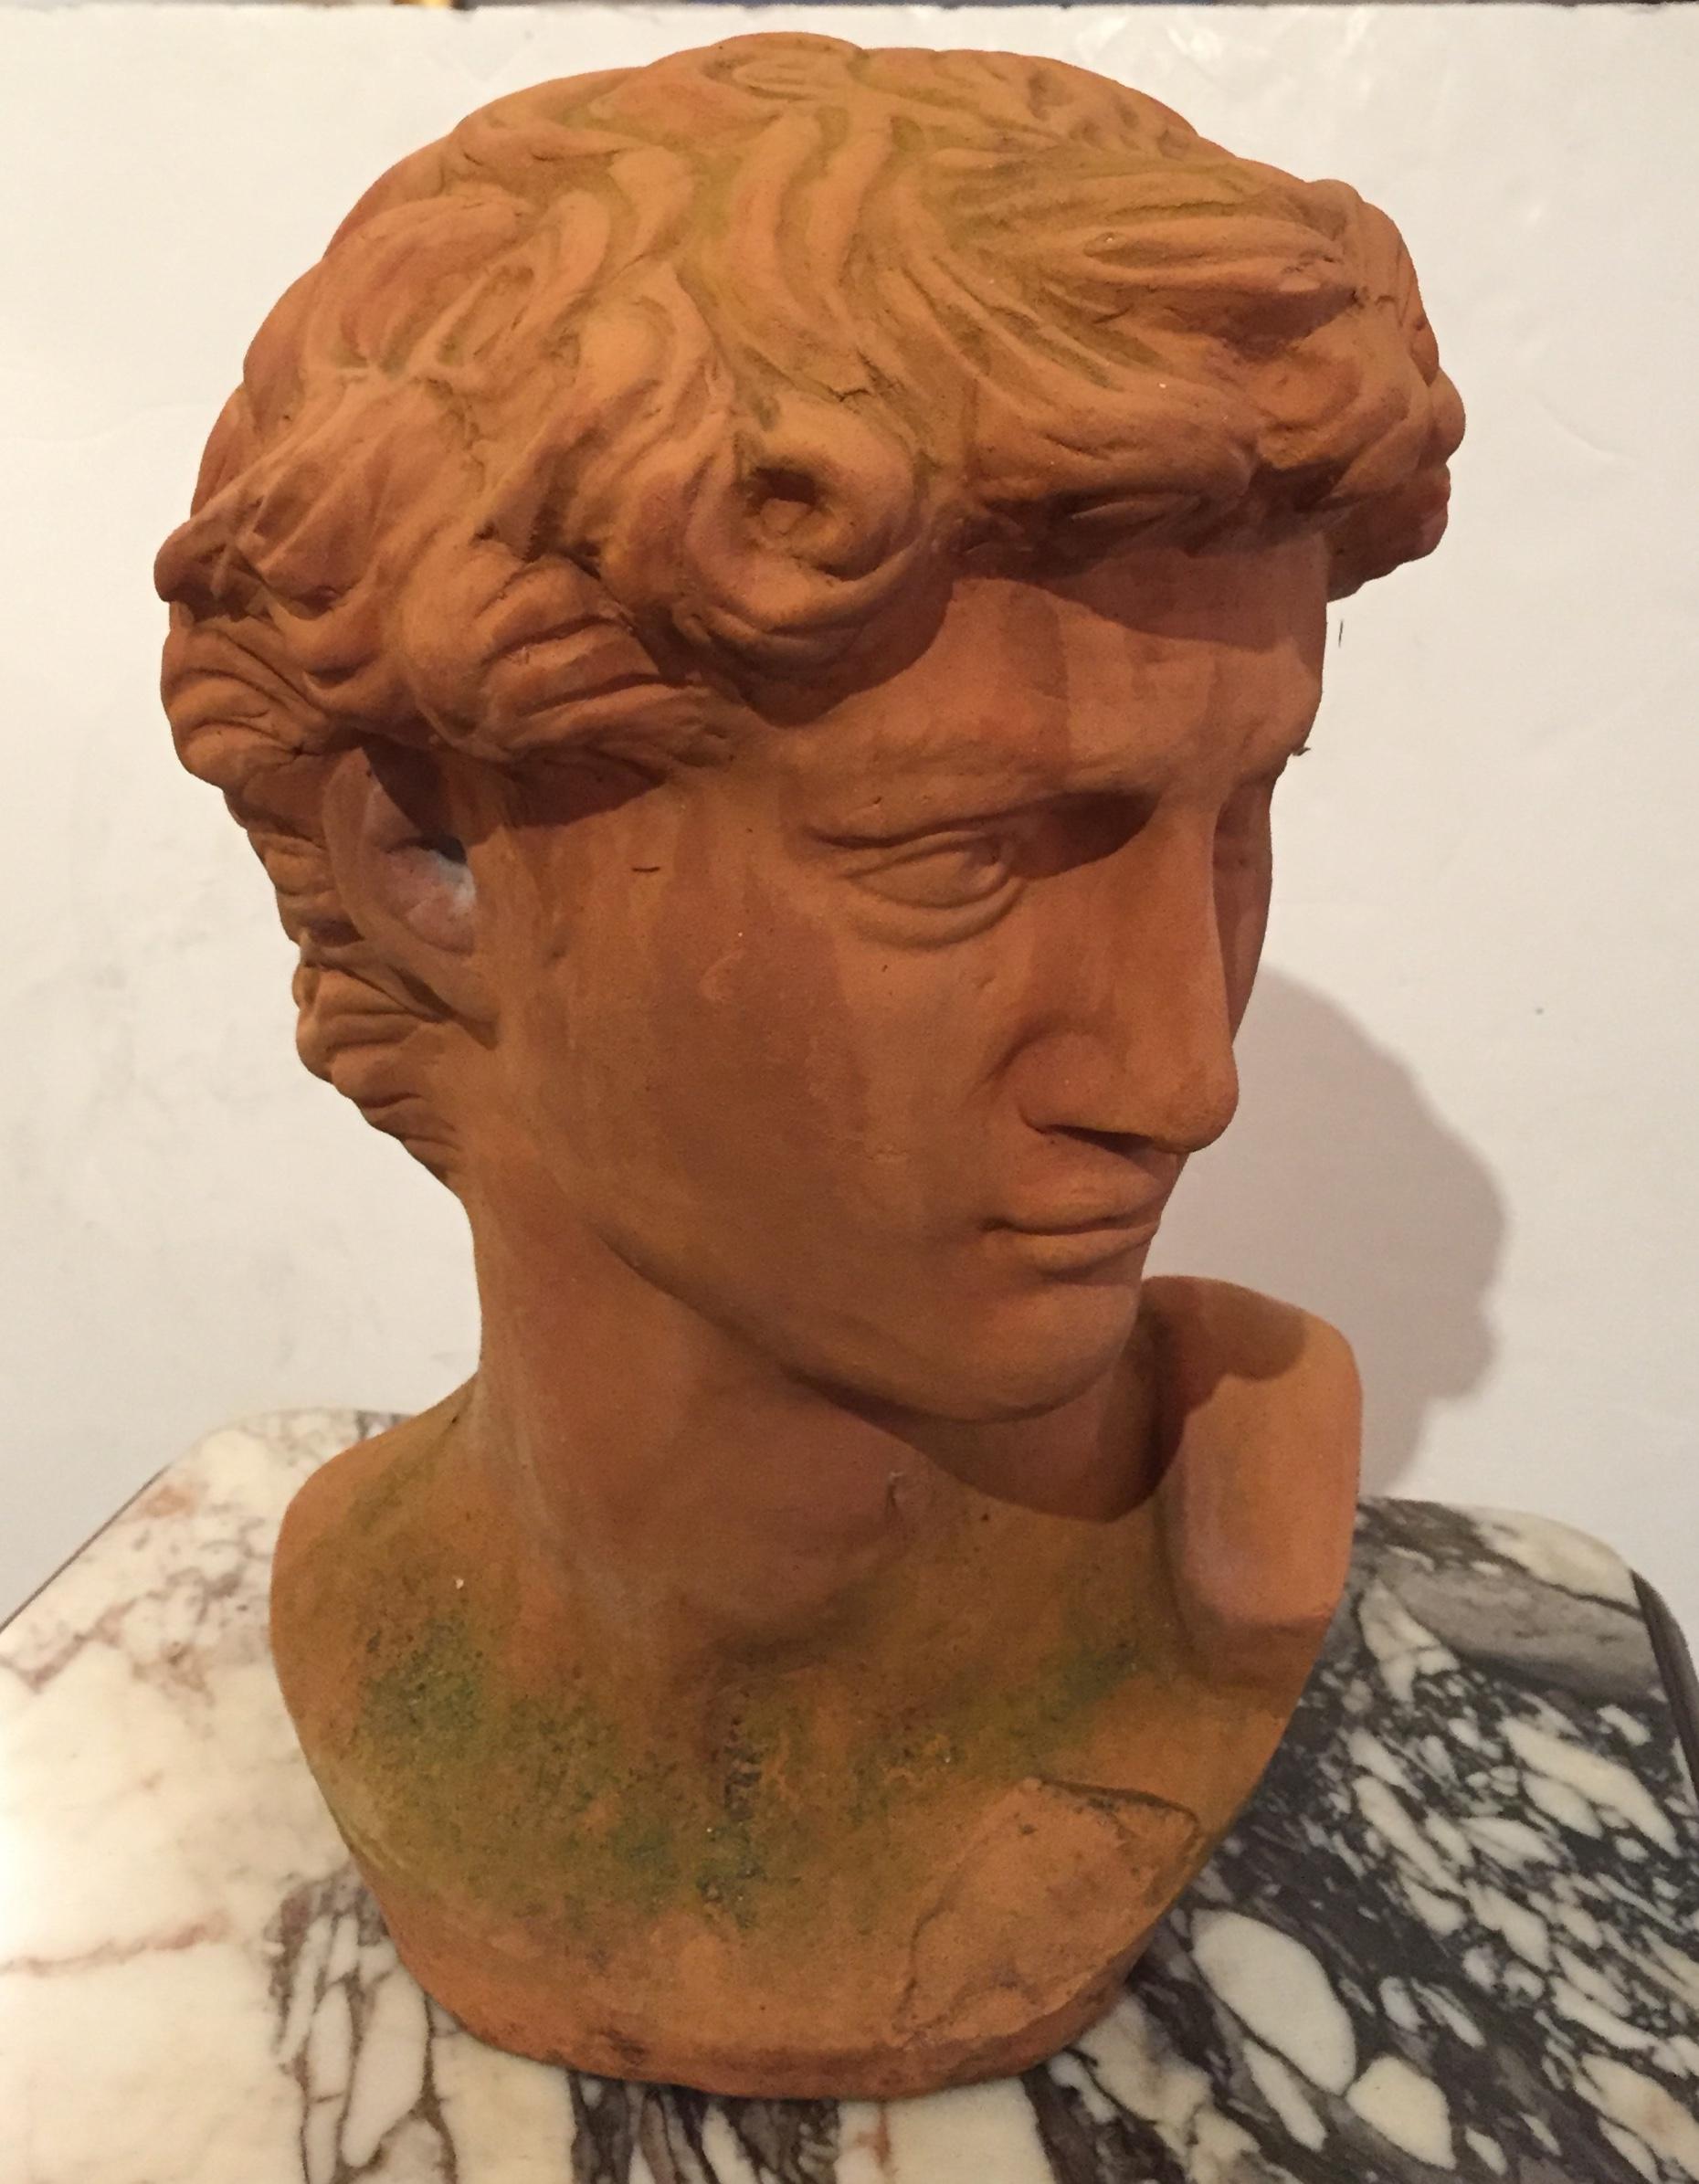 which italian statesman is pictured in the painted terra cotta bust